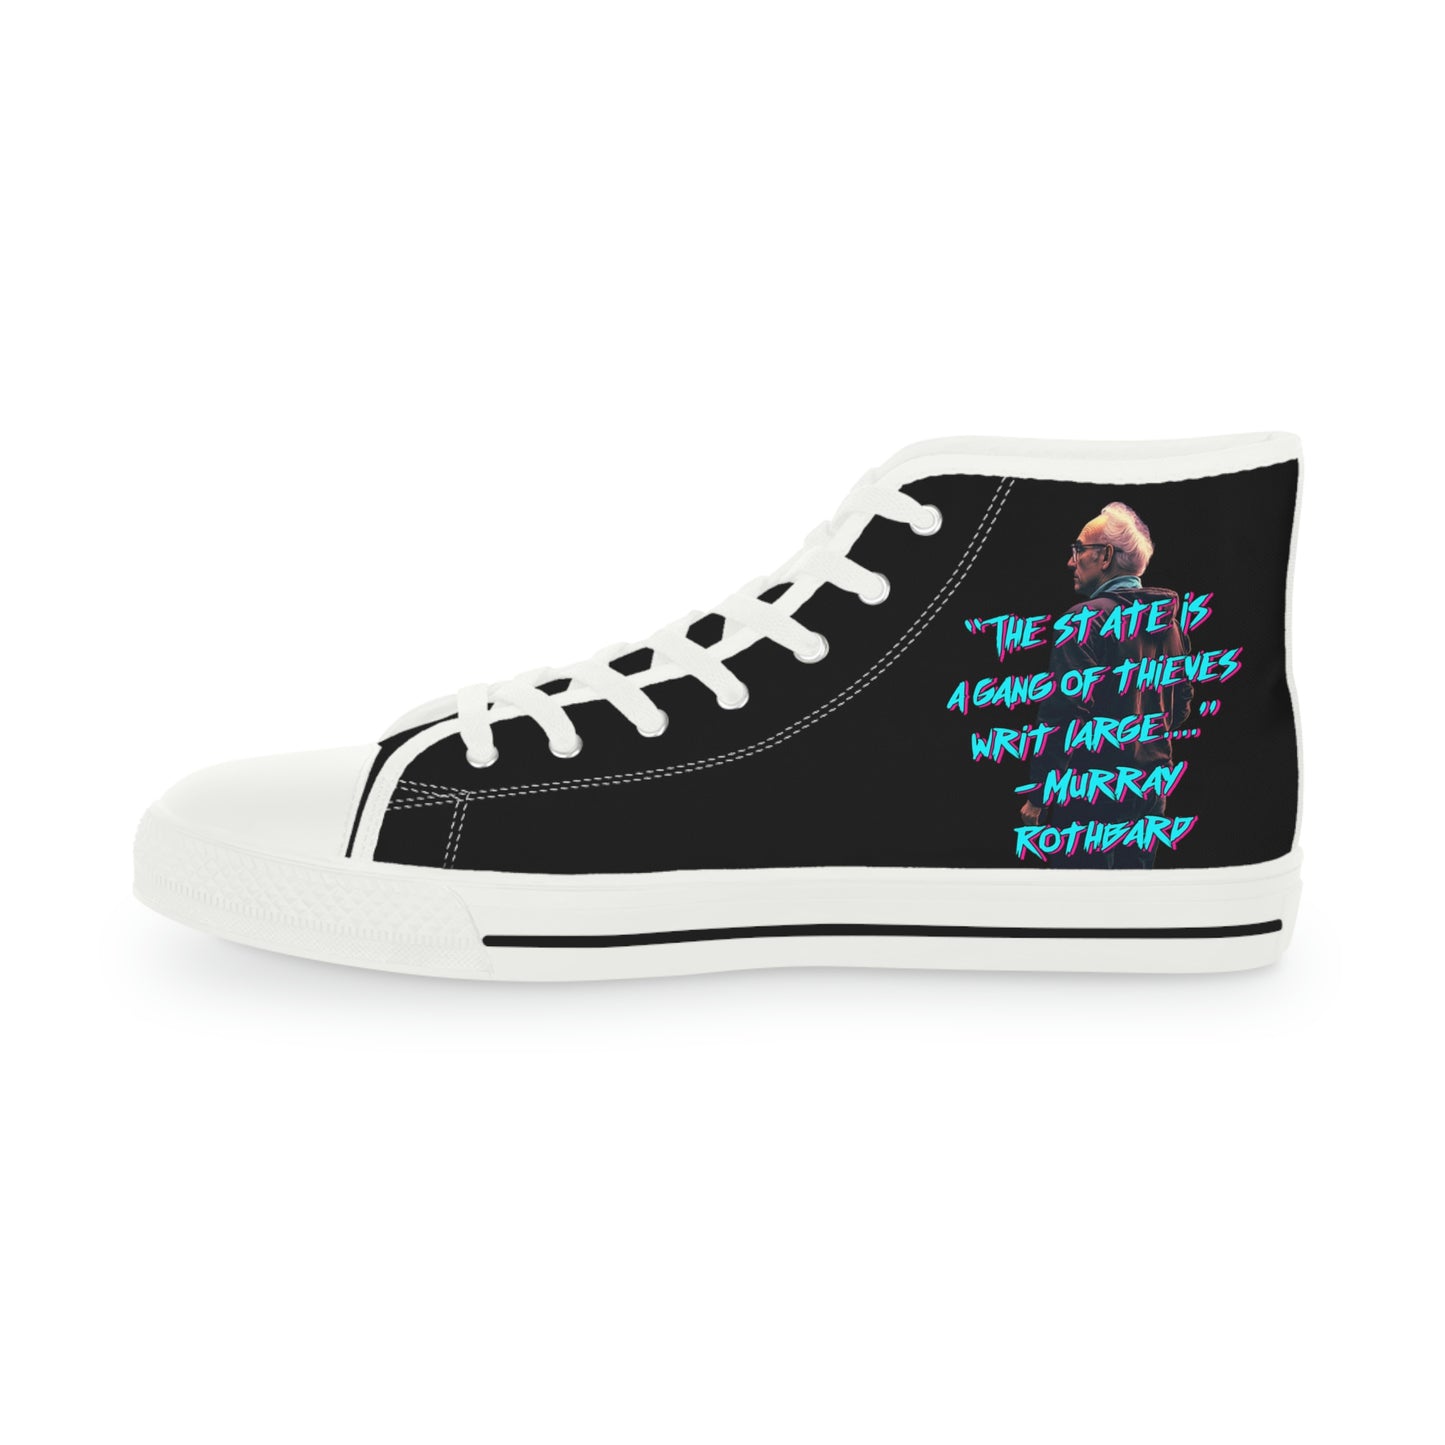 "Our Enemy, The State" Men's High Top Sneakers